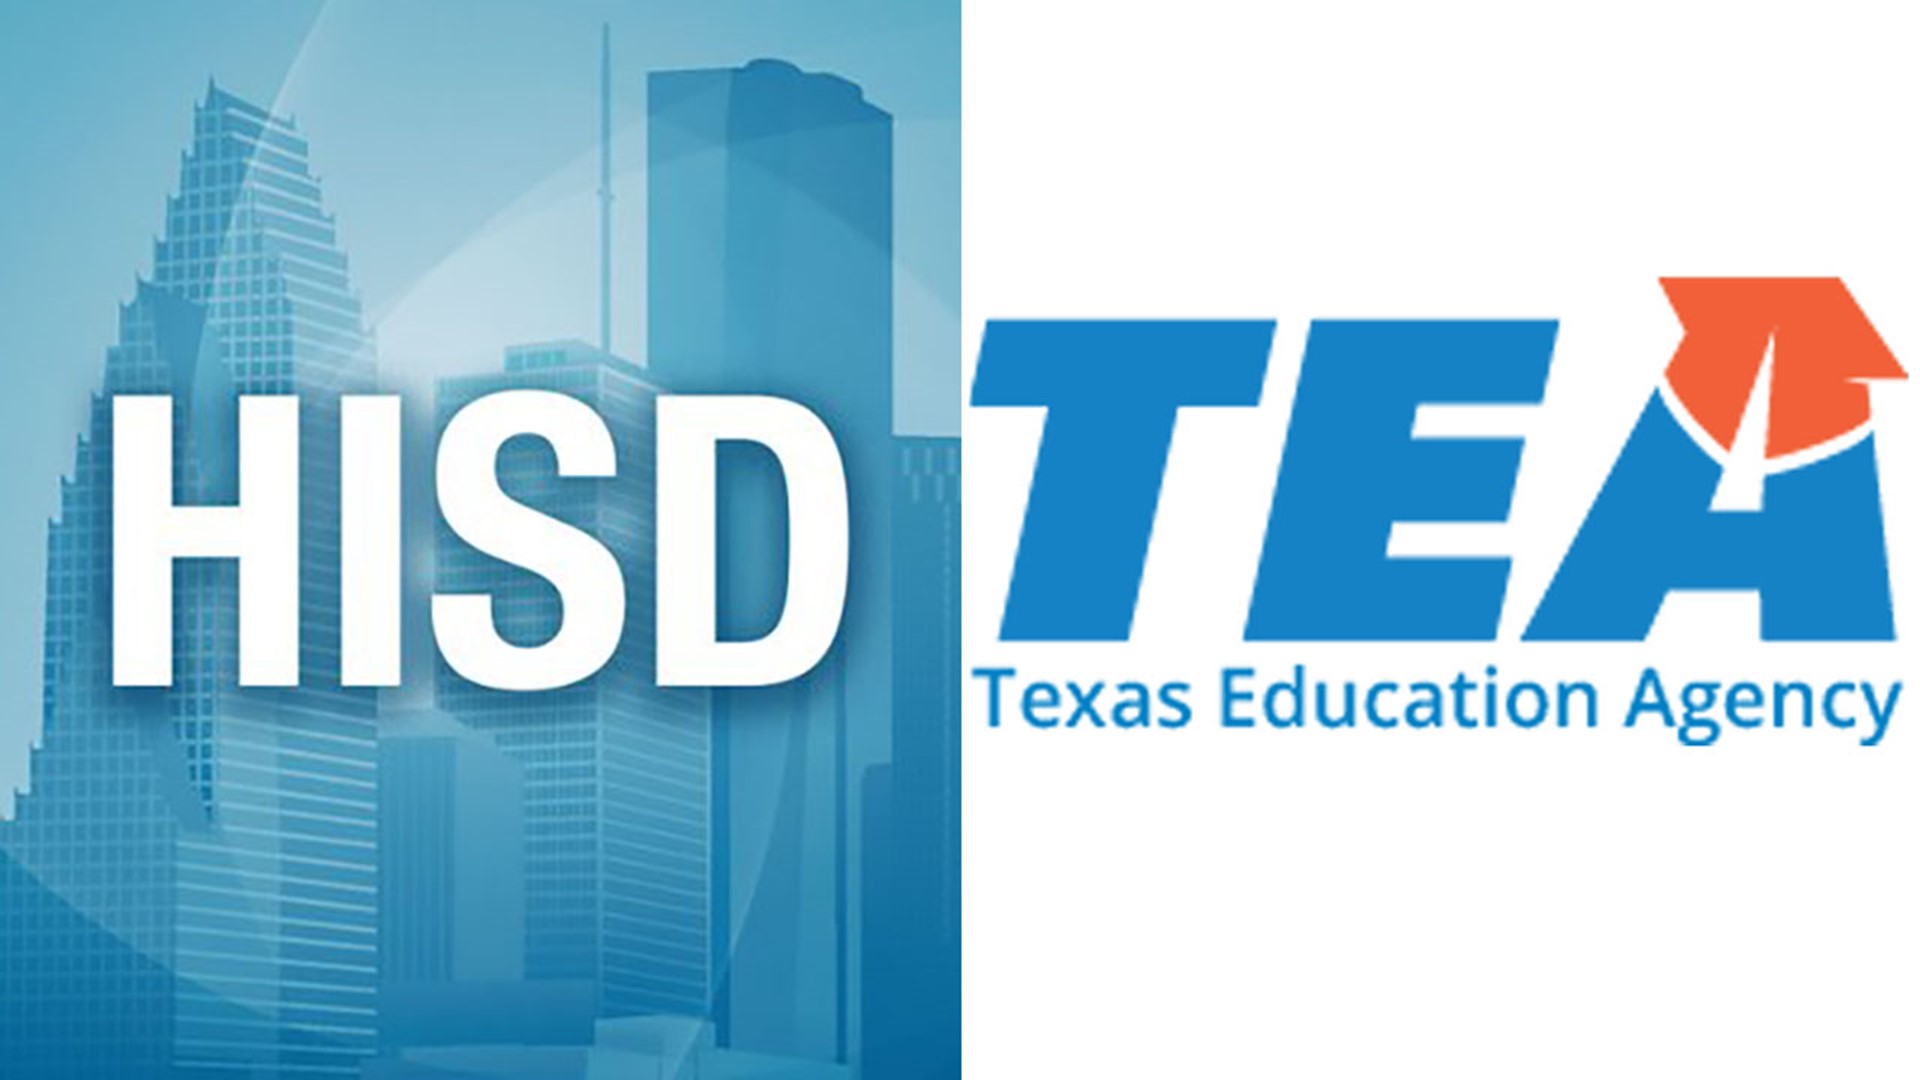 TEA takeover efforts started in 2019 due to perpetually failing schools, and among other things, alleged misconduct by certain HISD trustees.